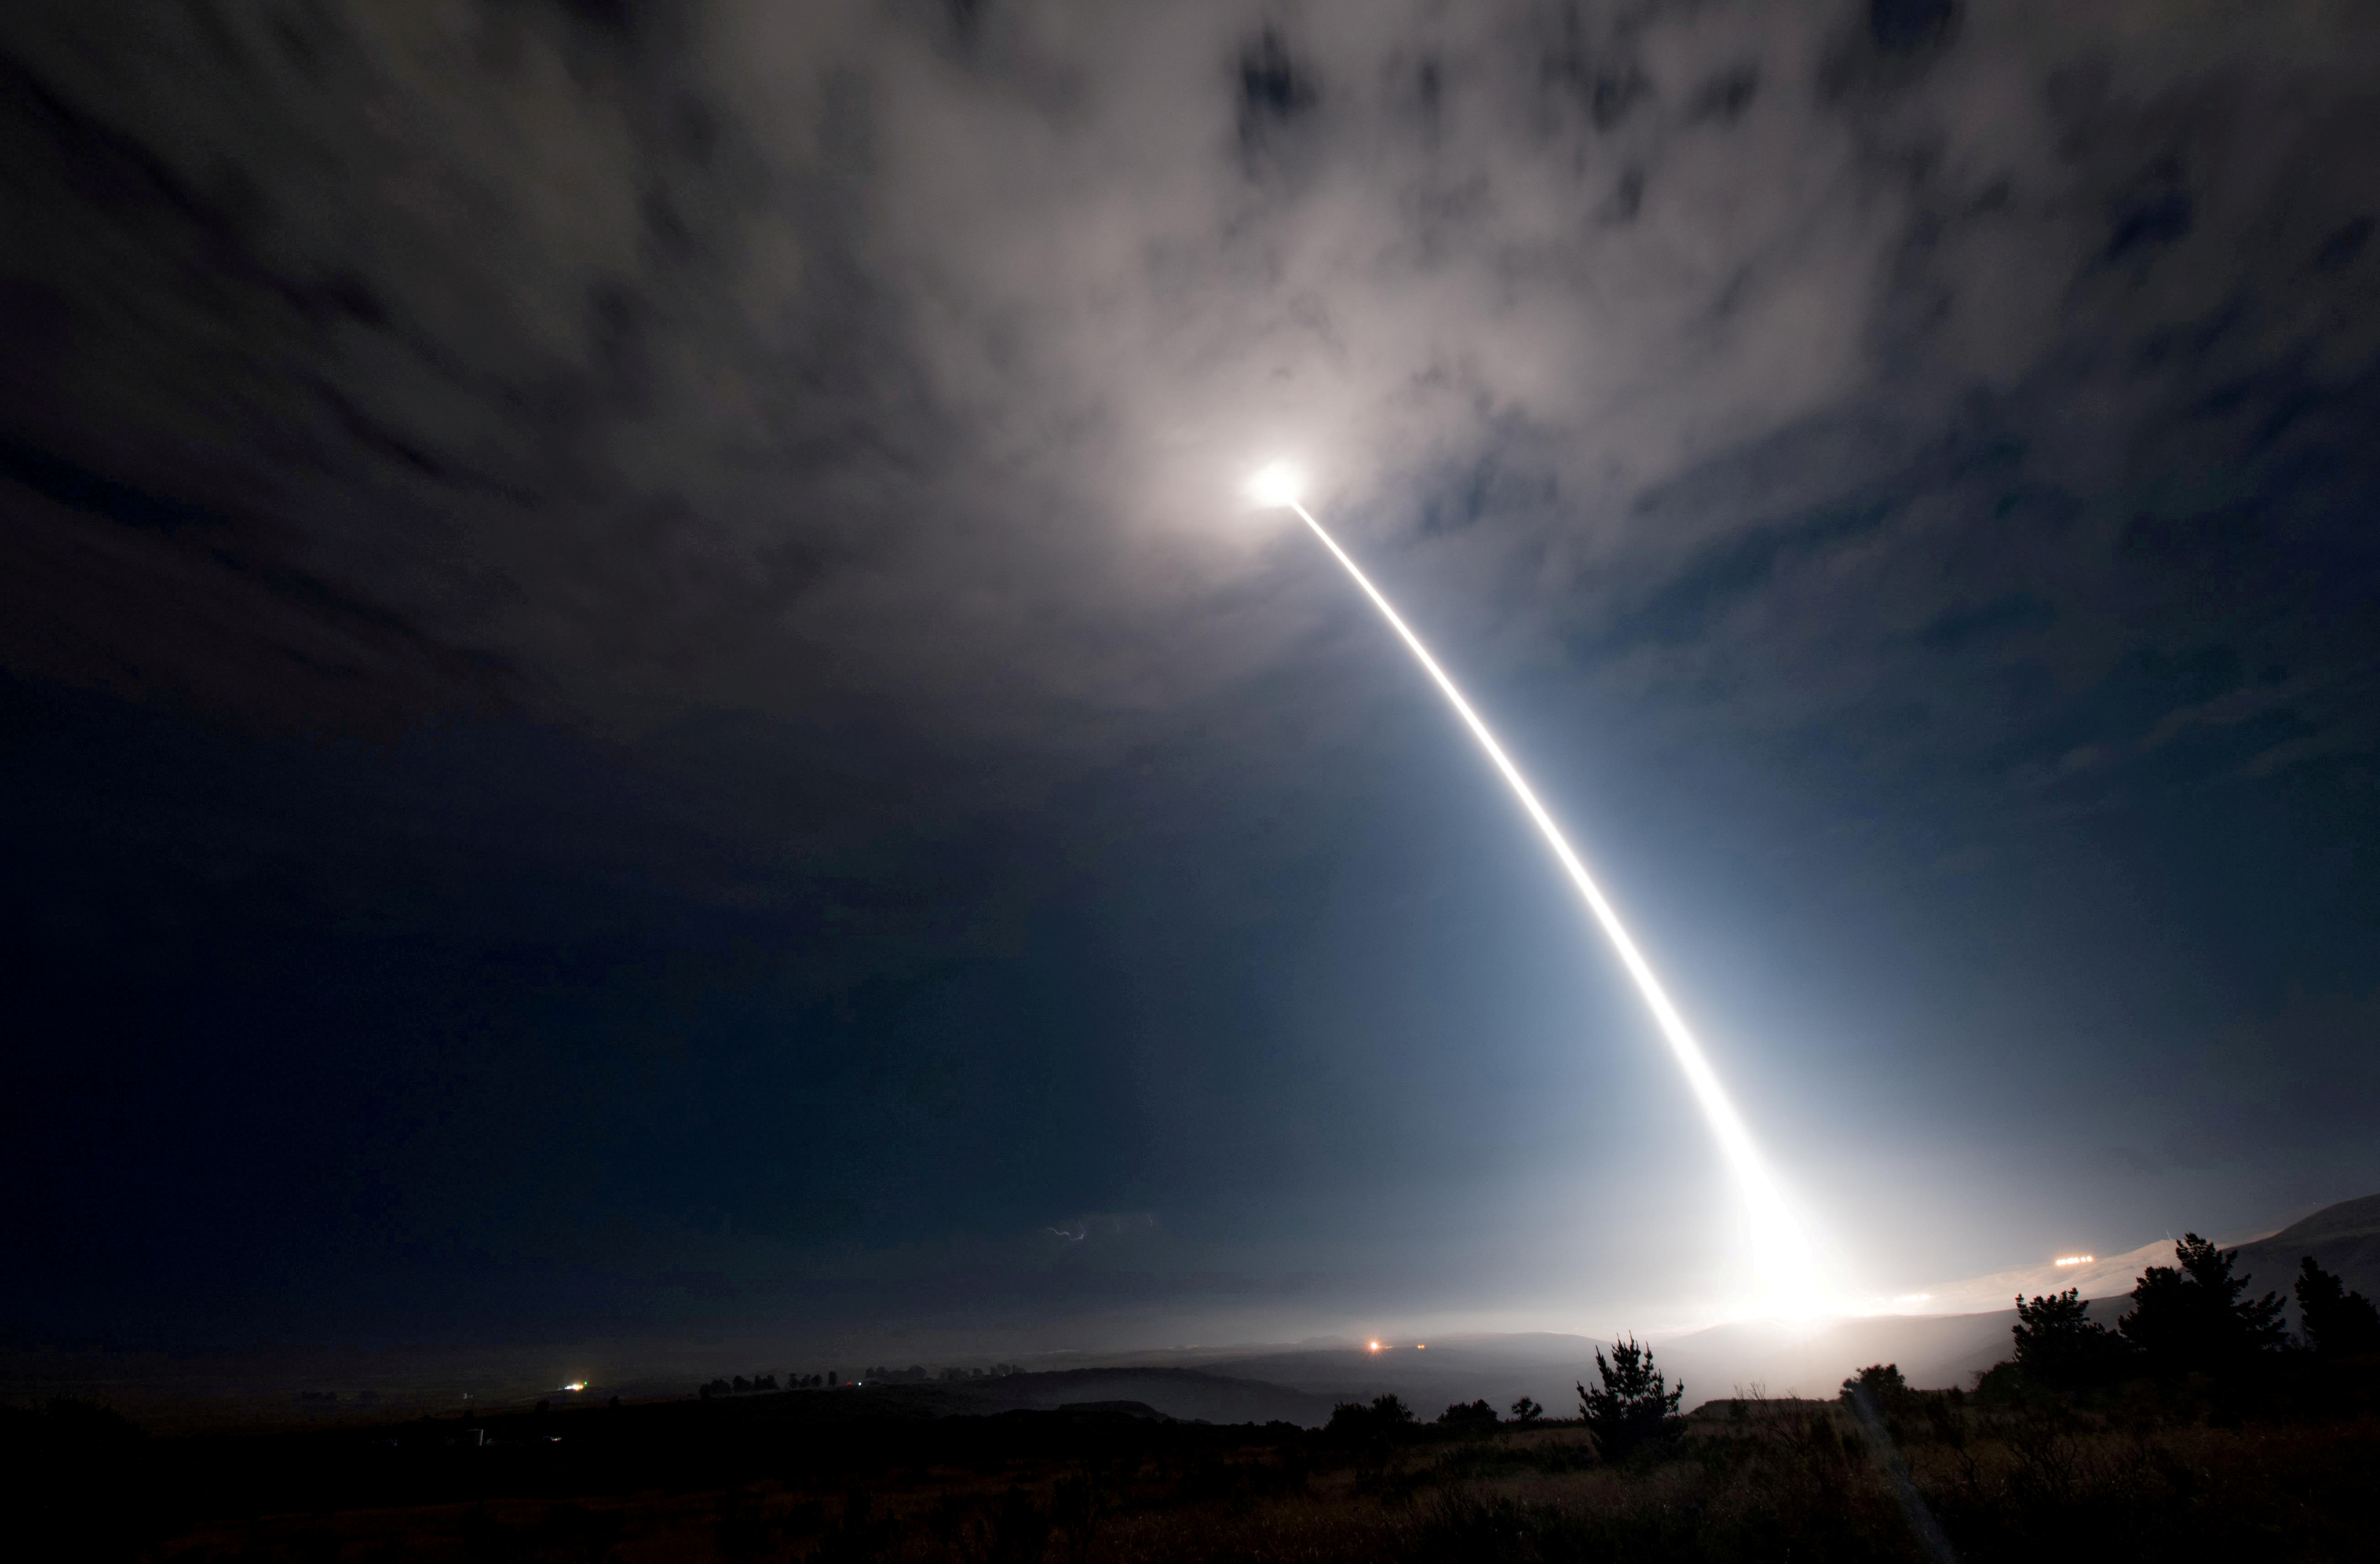 An unarmed Minuteman III intercontinental ballistic missile launches from Vandenberg Air Force Base